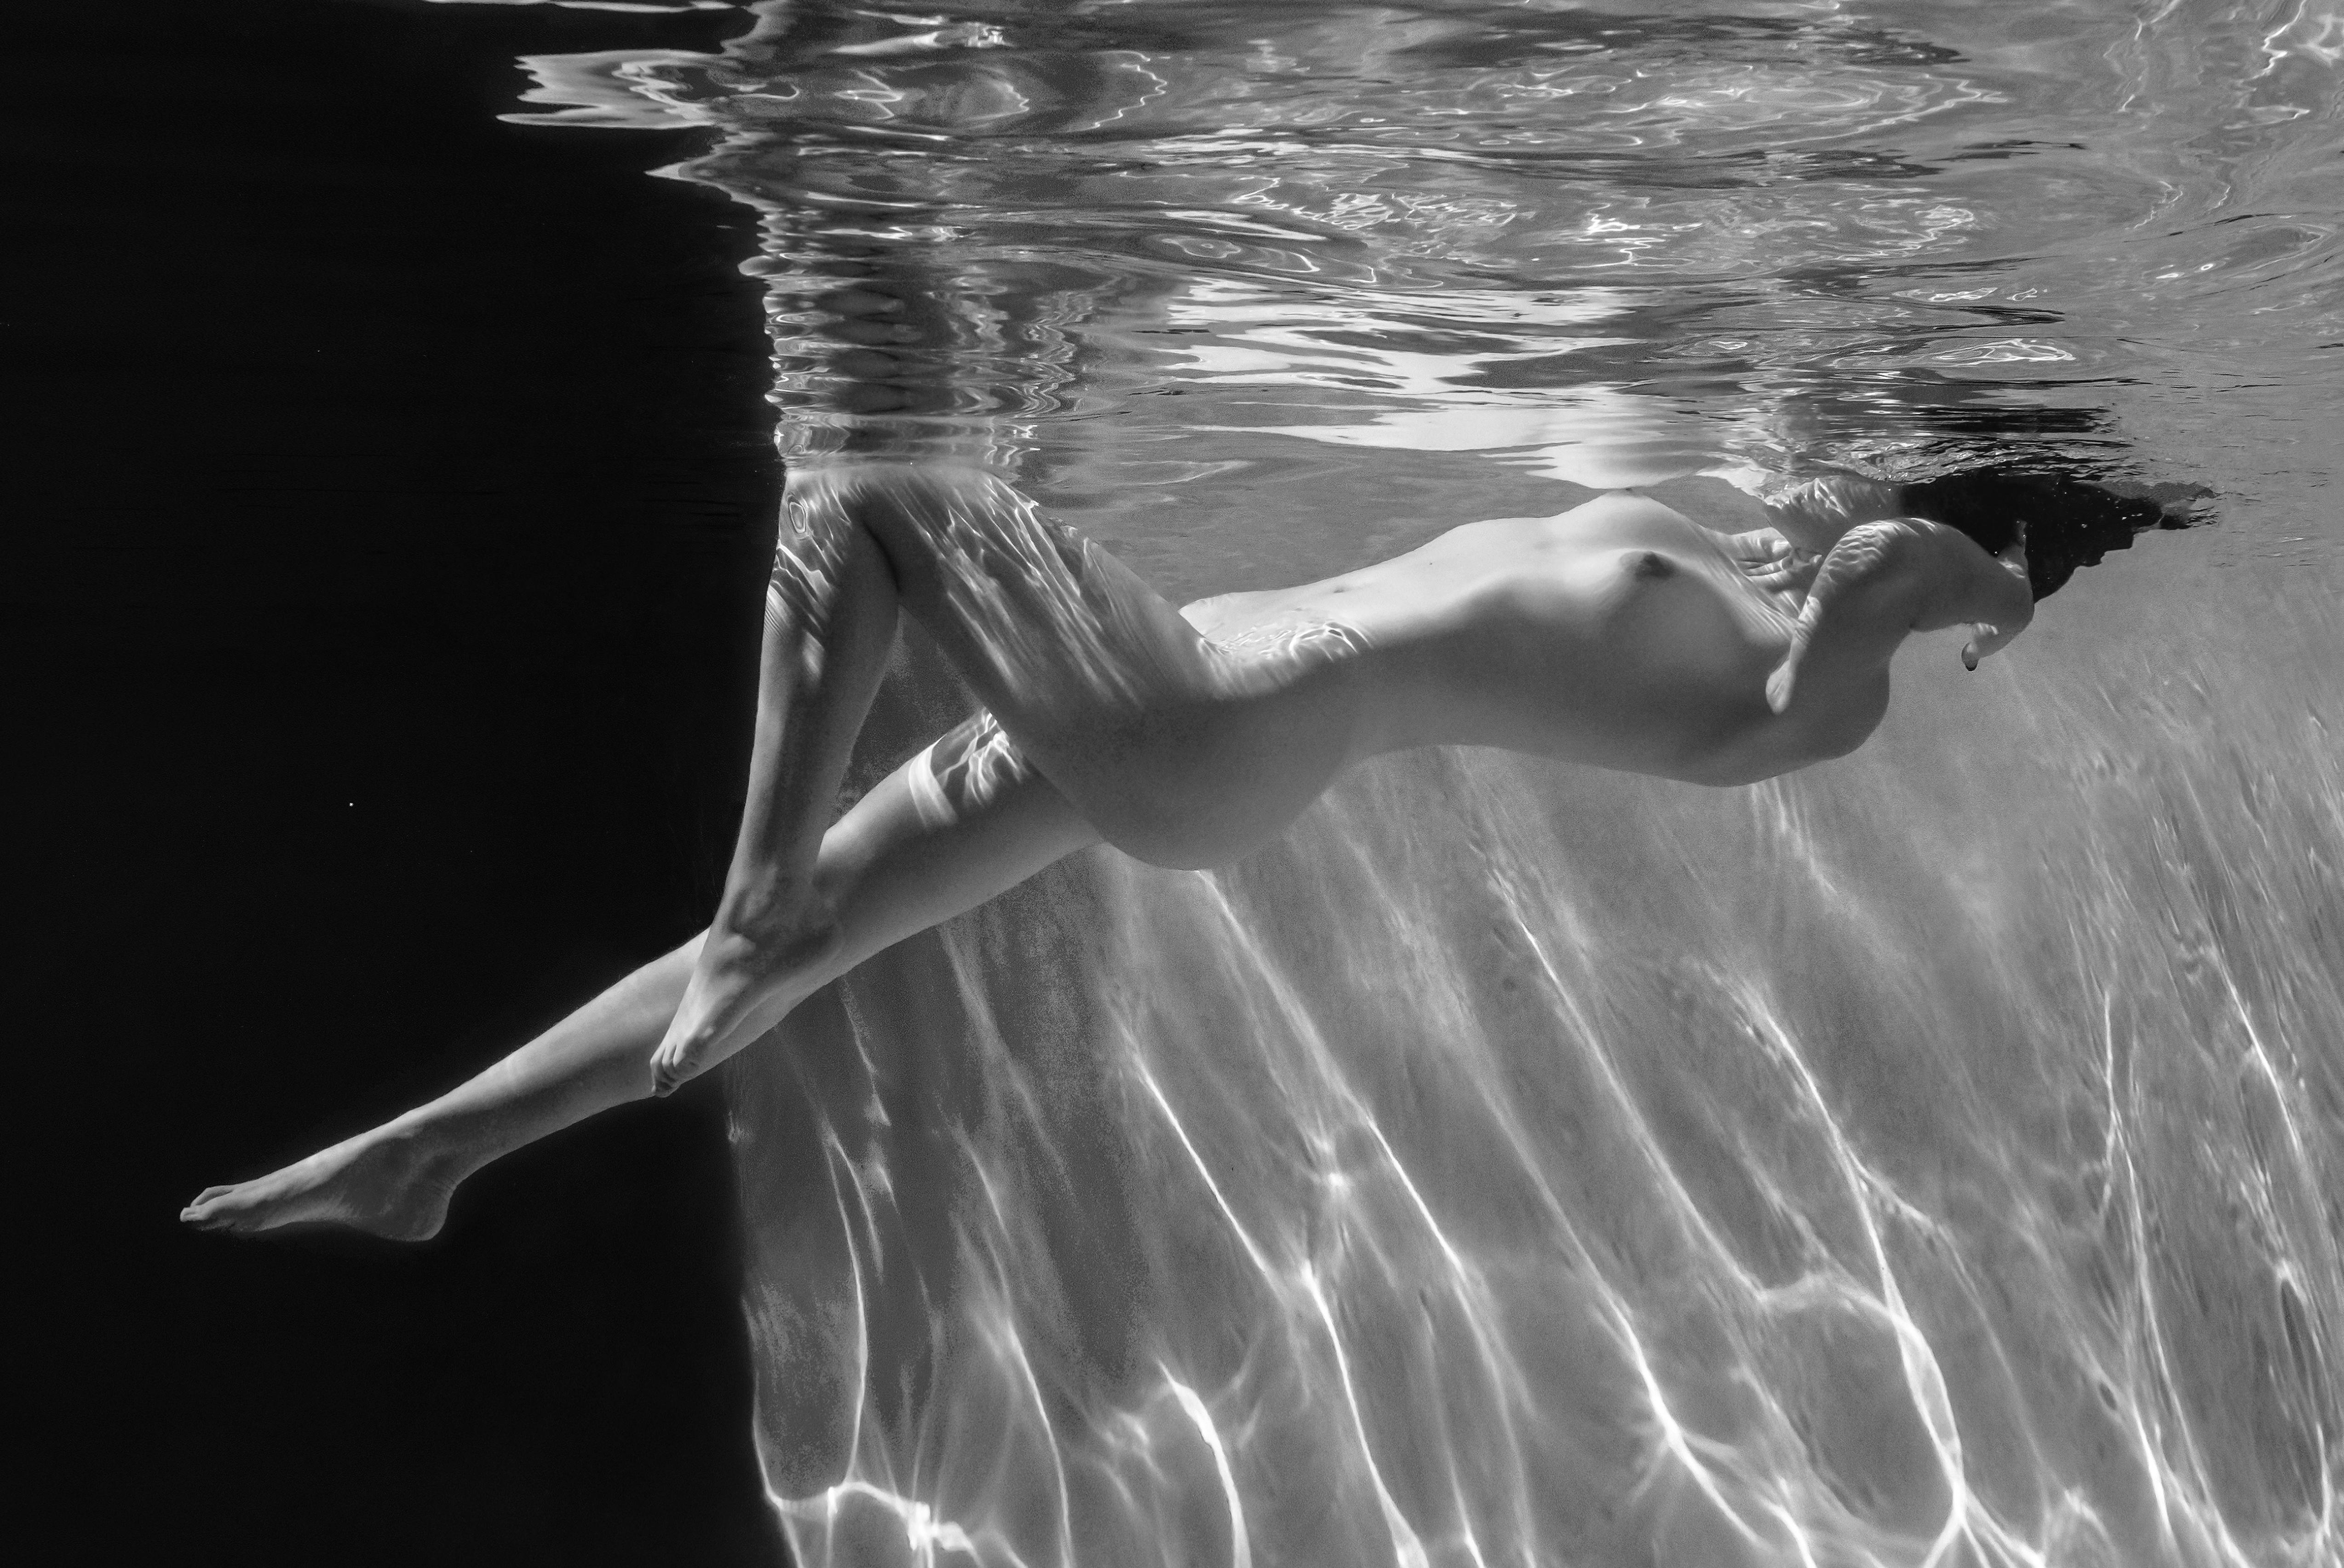 Marble Cave (triptych) - underwater b&w nude photograph - 3 prints 35